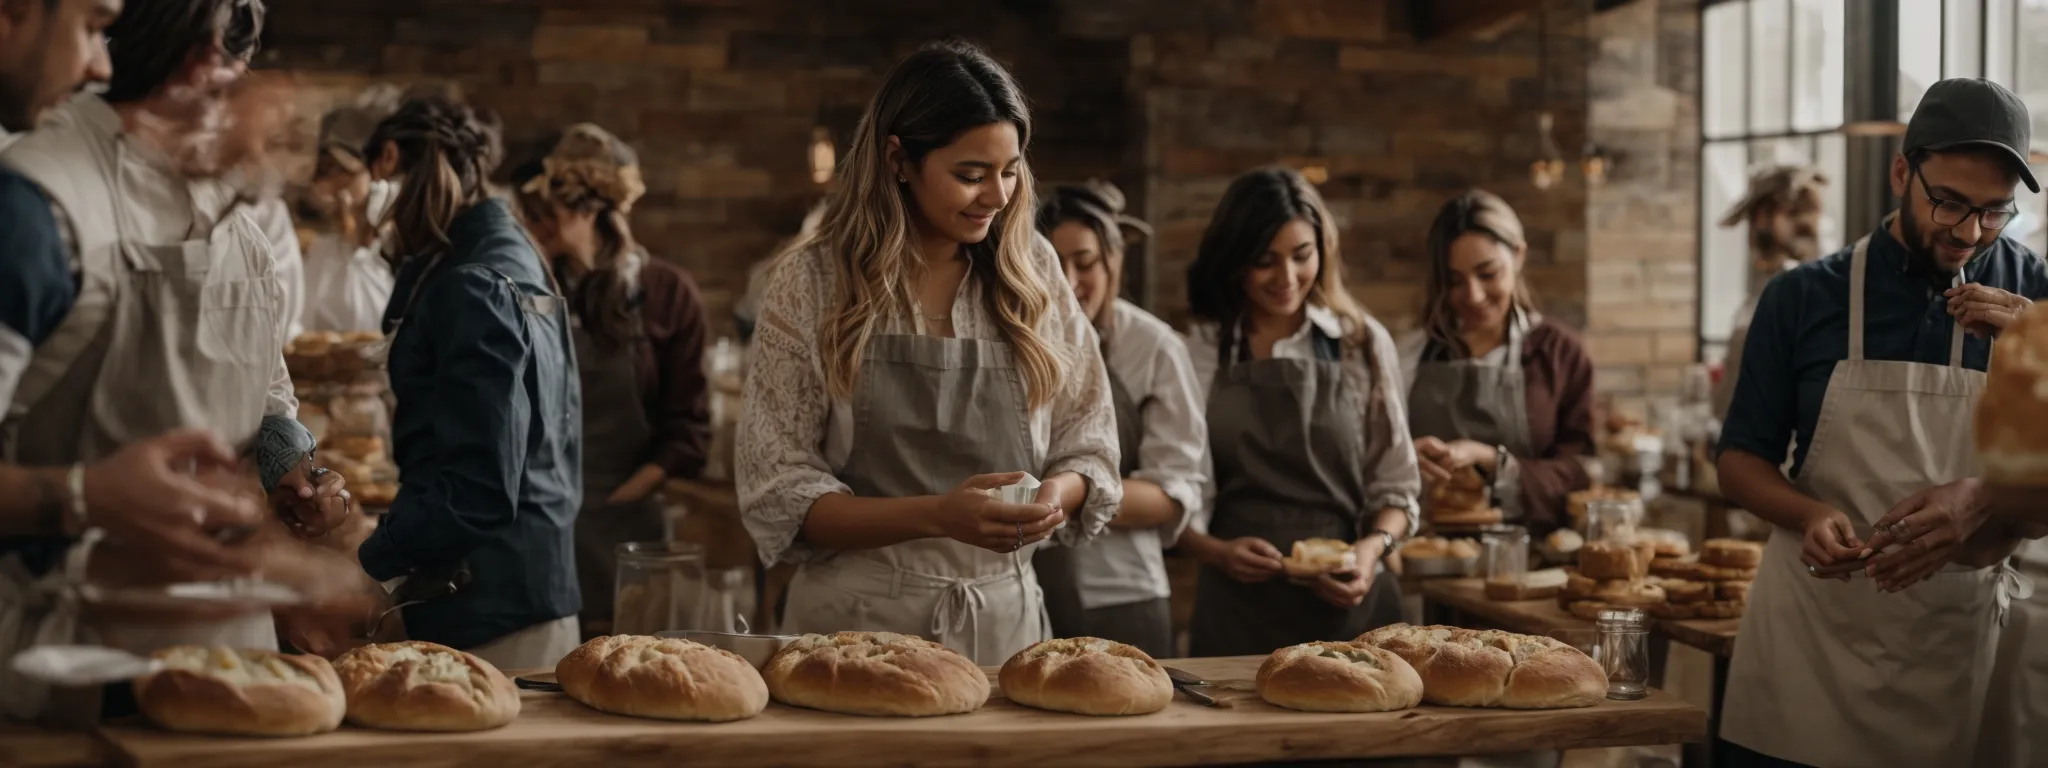 a diverse group of food bloggers engaged in a tasting event at a rustic bakery, with each tasting station helmed by a different artisan baker presenting their signature breads.